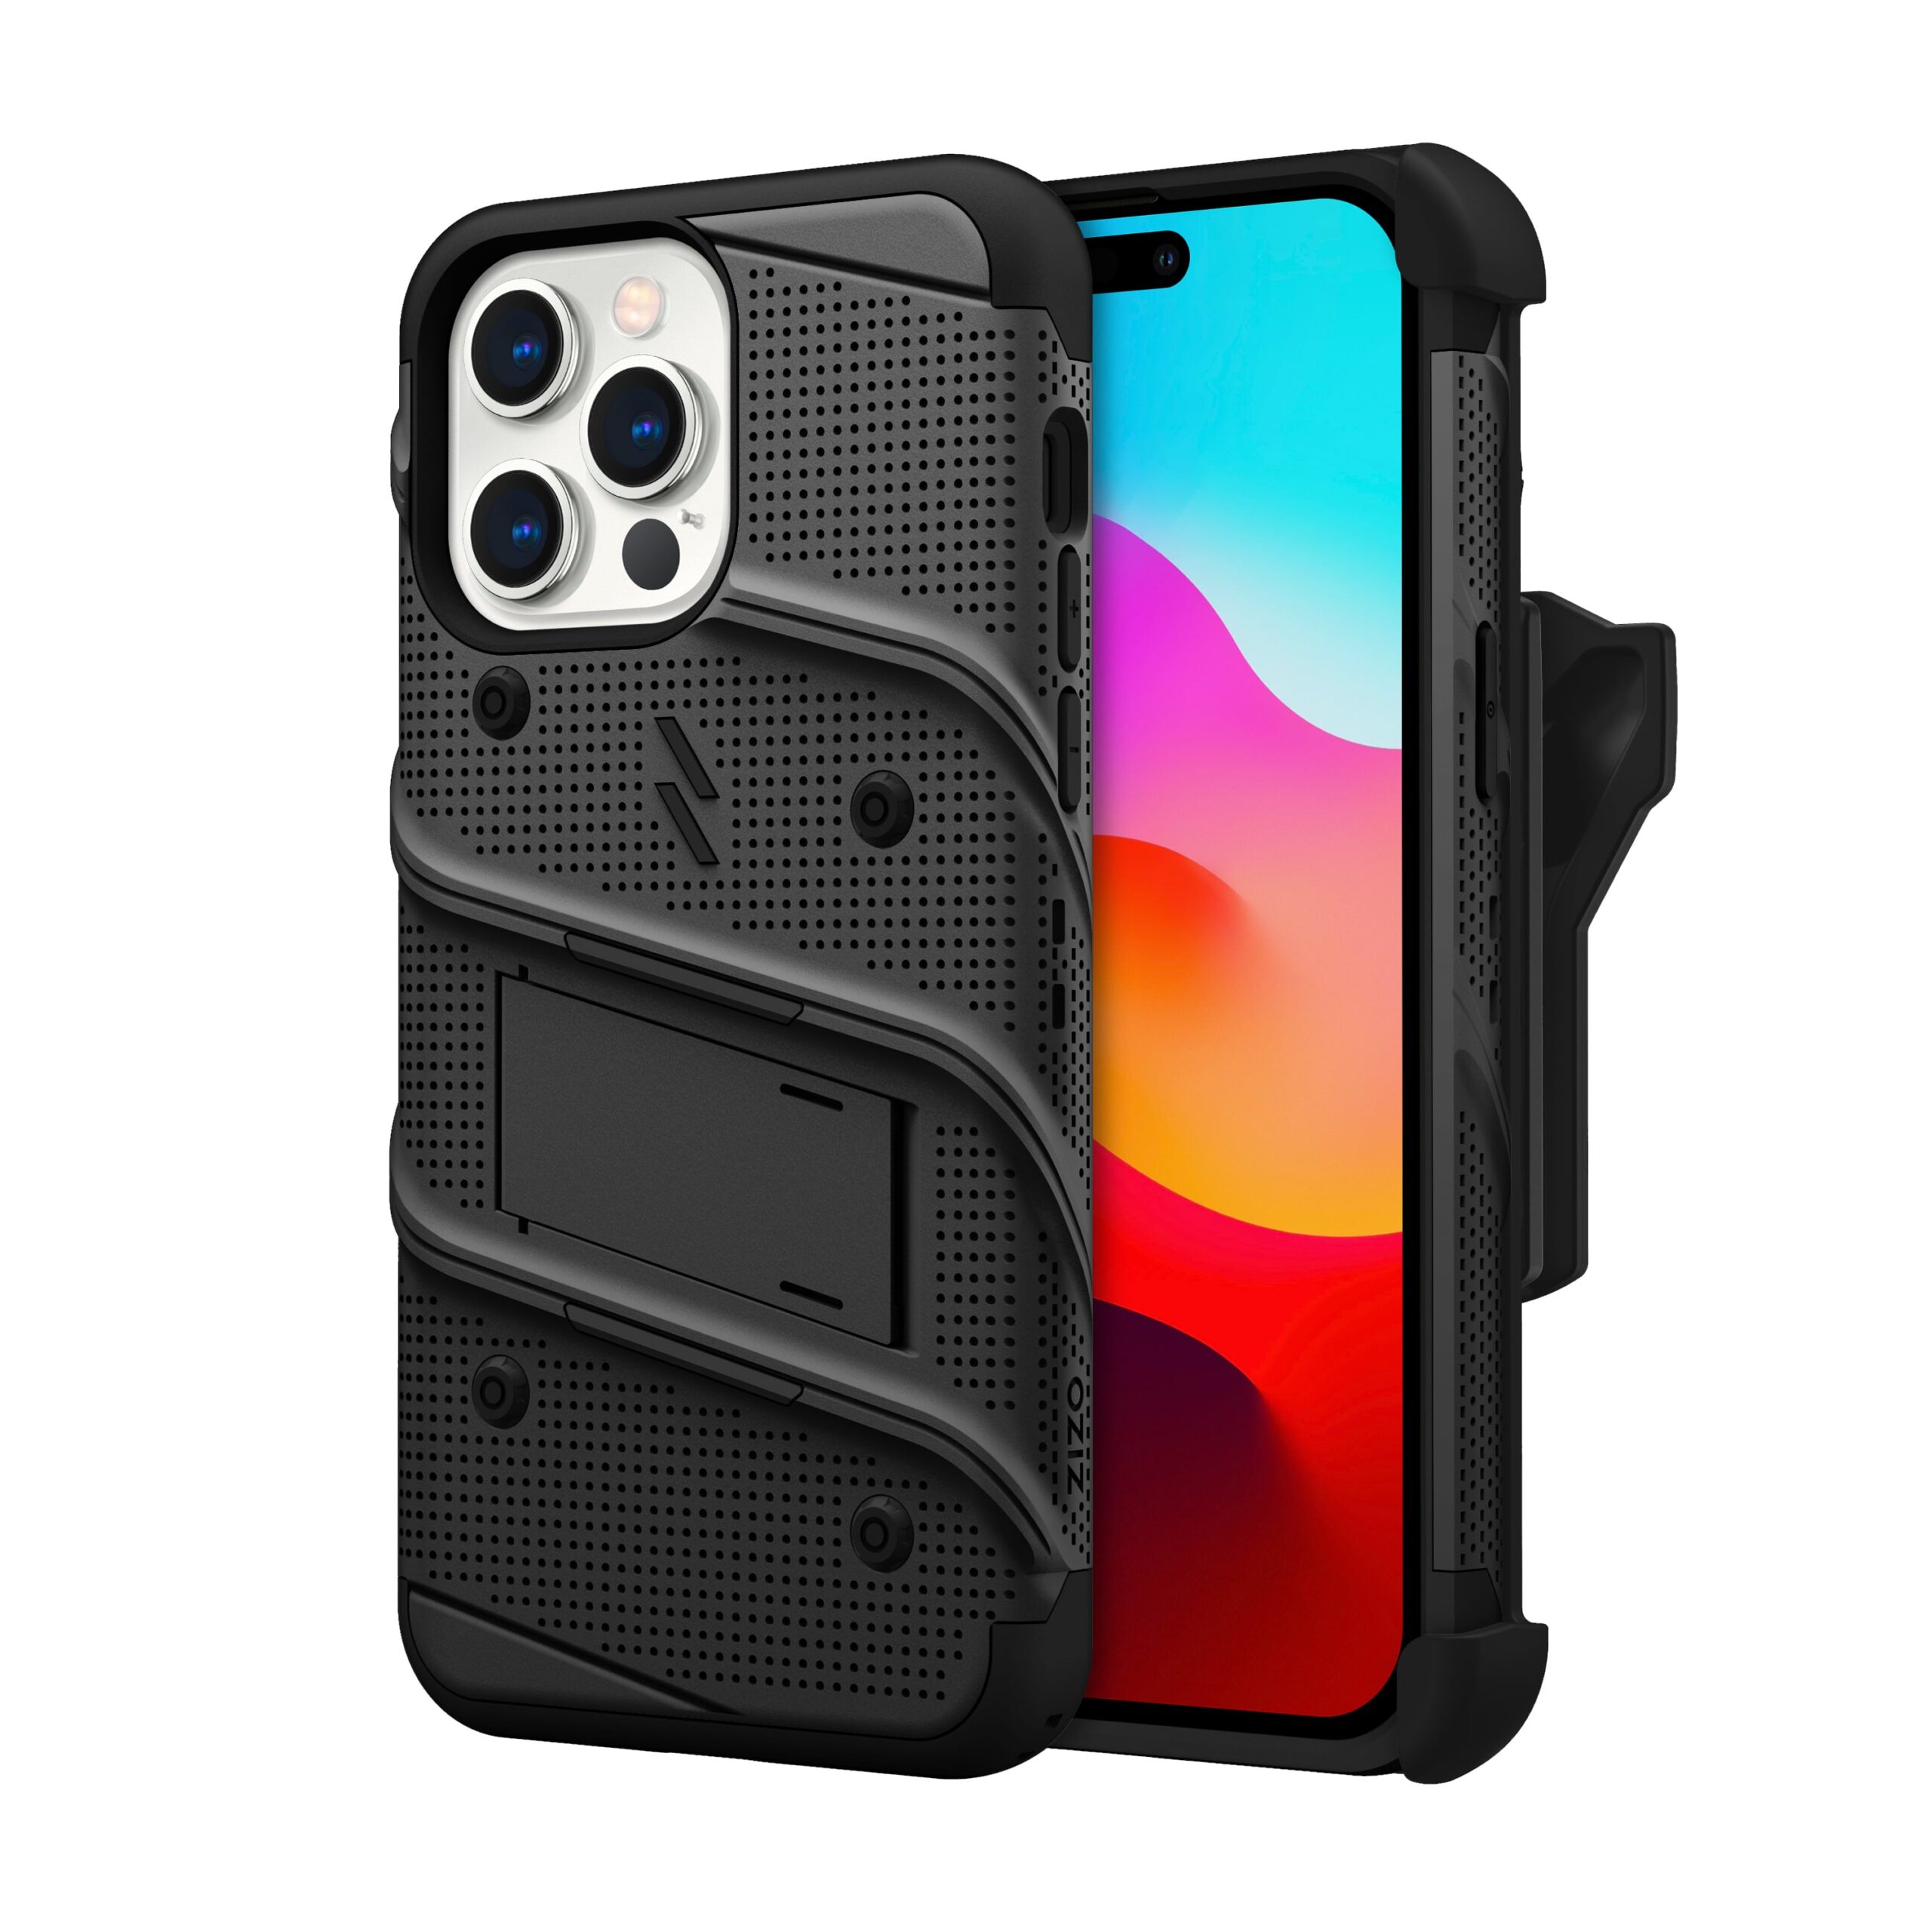 Zizo Bolt iPhone 15 Pro Max Holster Case with Tempered Glass, Kickstand & Lanyard "Protective & Light Weight" - Black